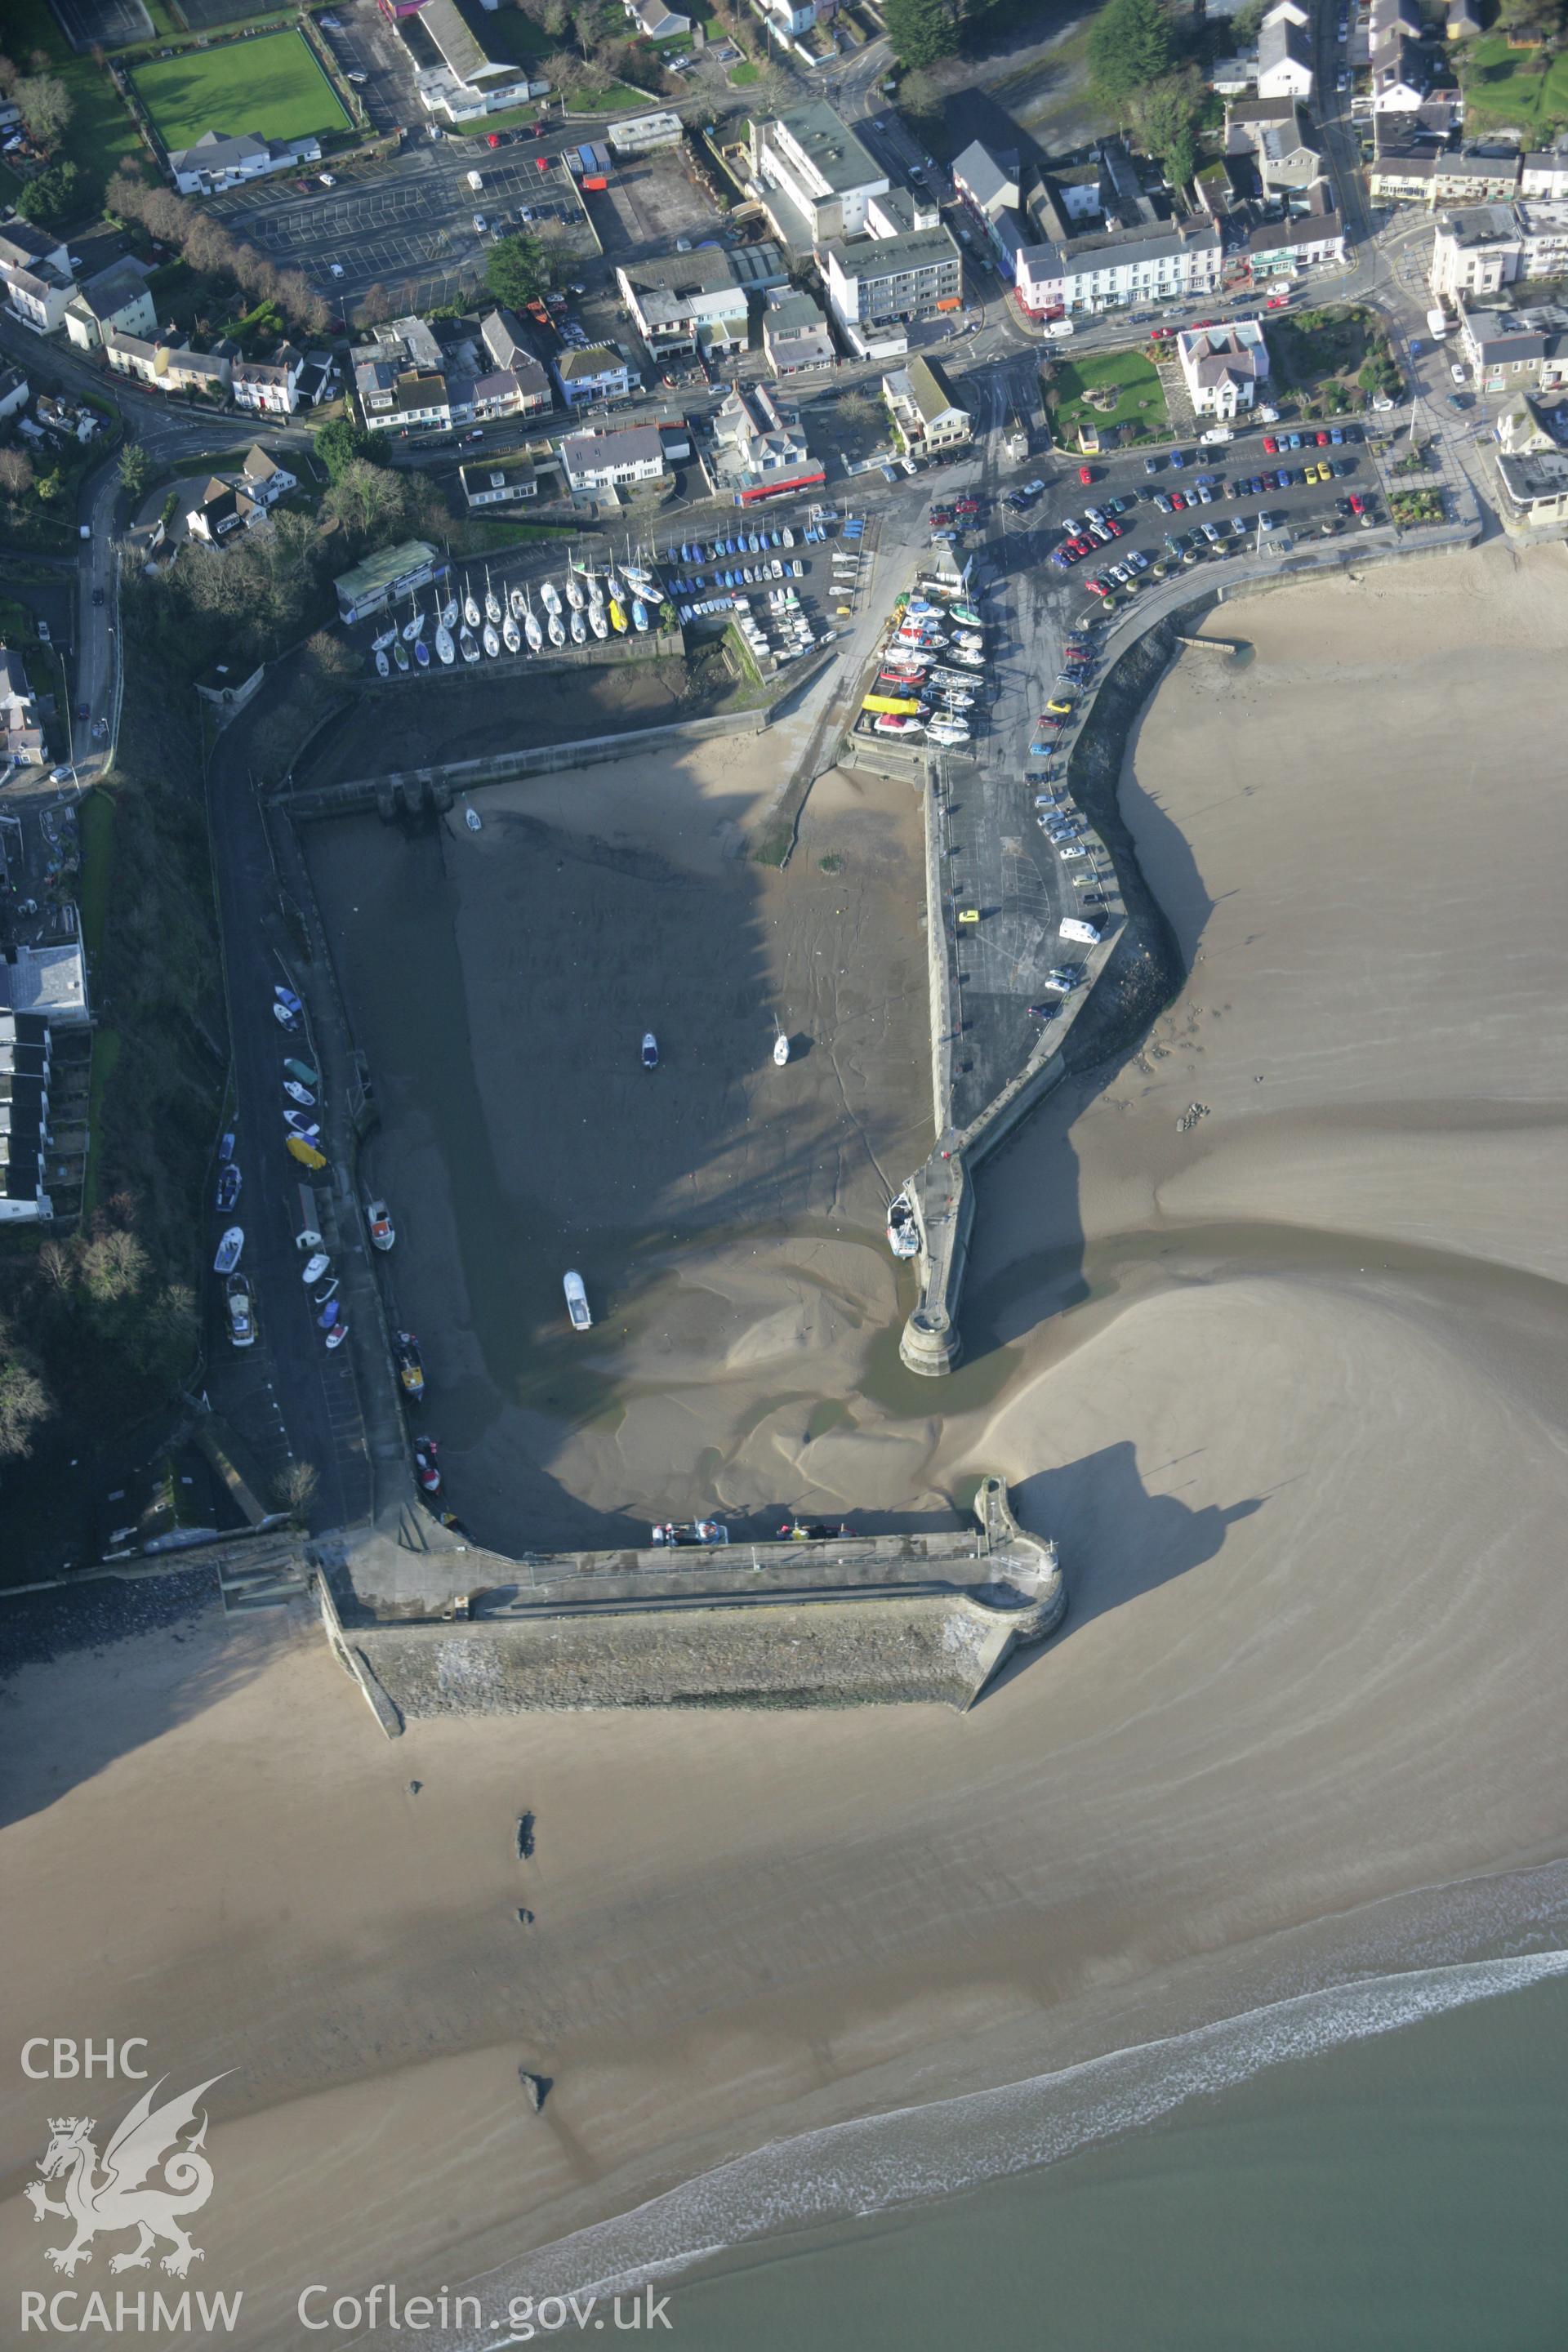 RCAHMW colour oblique aerial photograph of Saundersfoot Harbour from the east at high tide. Taken on 11 January 2006 by Toby Driver.